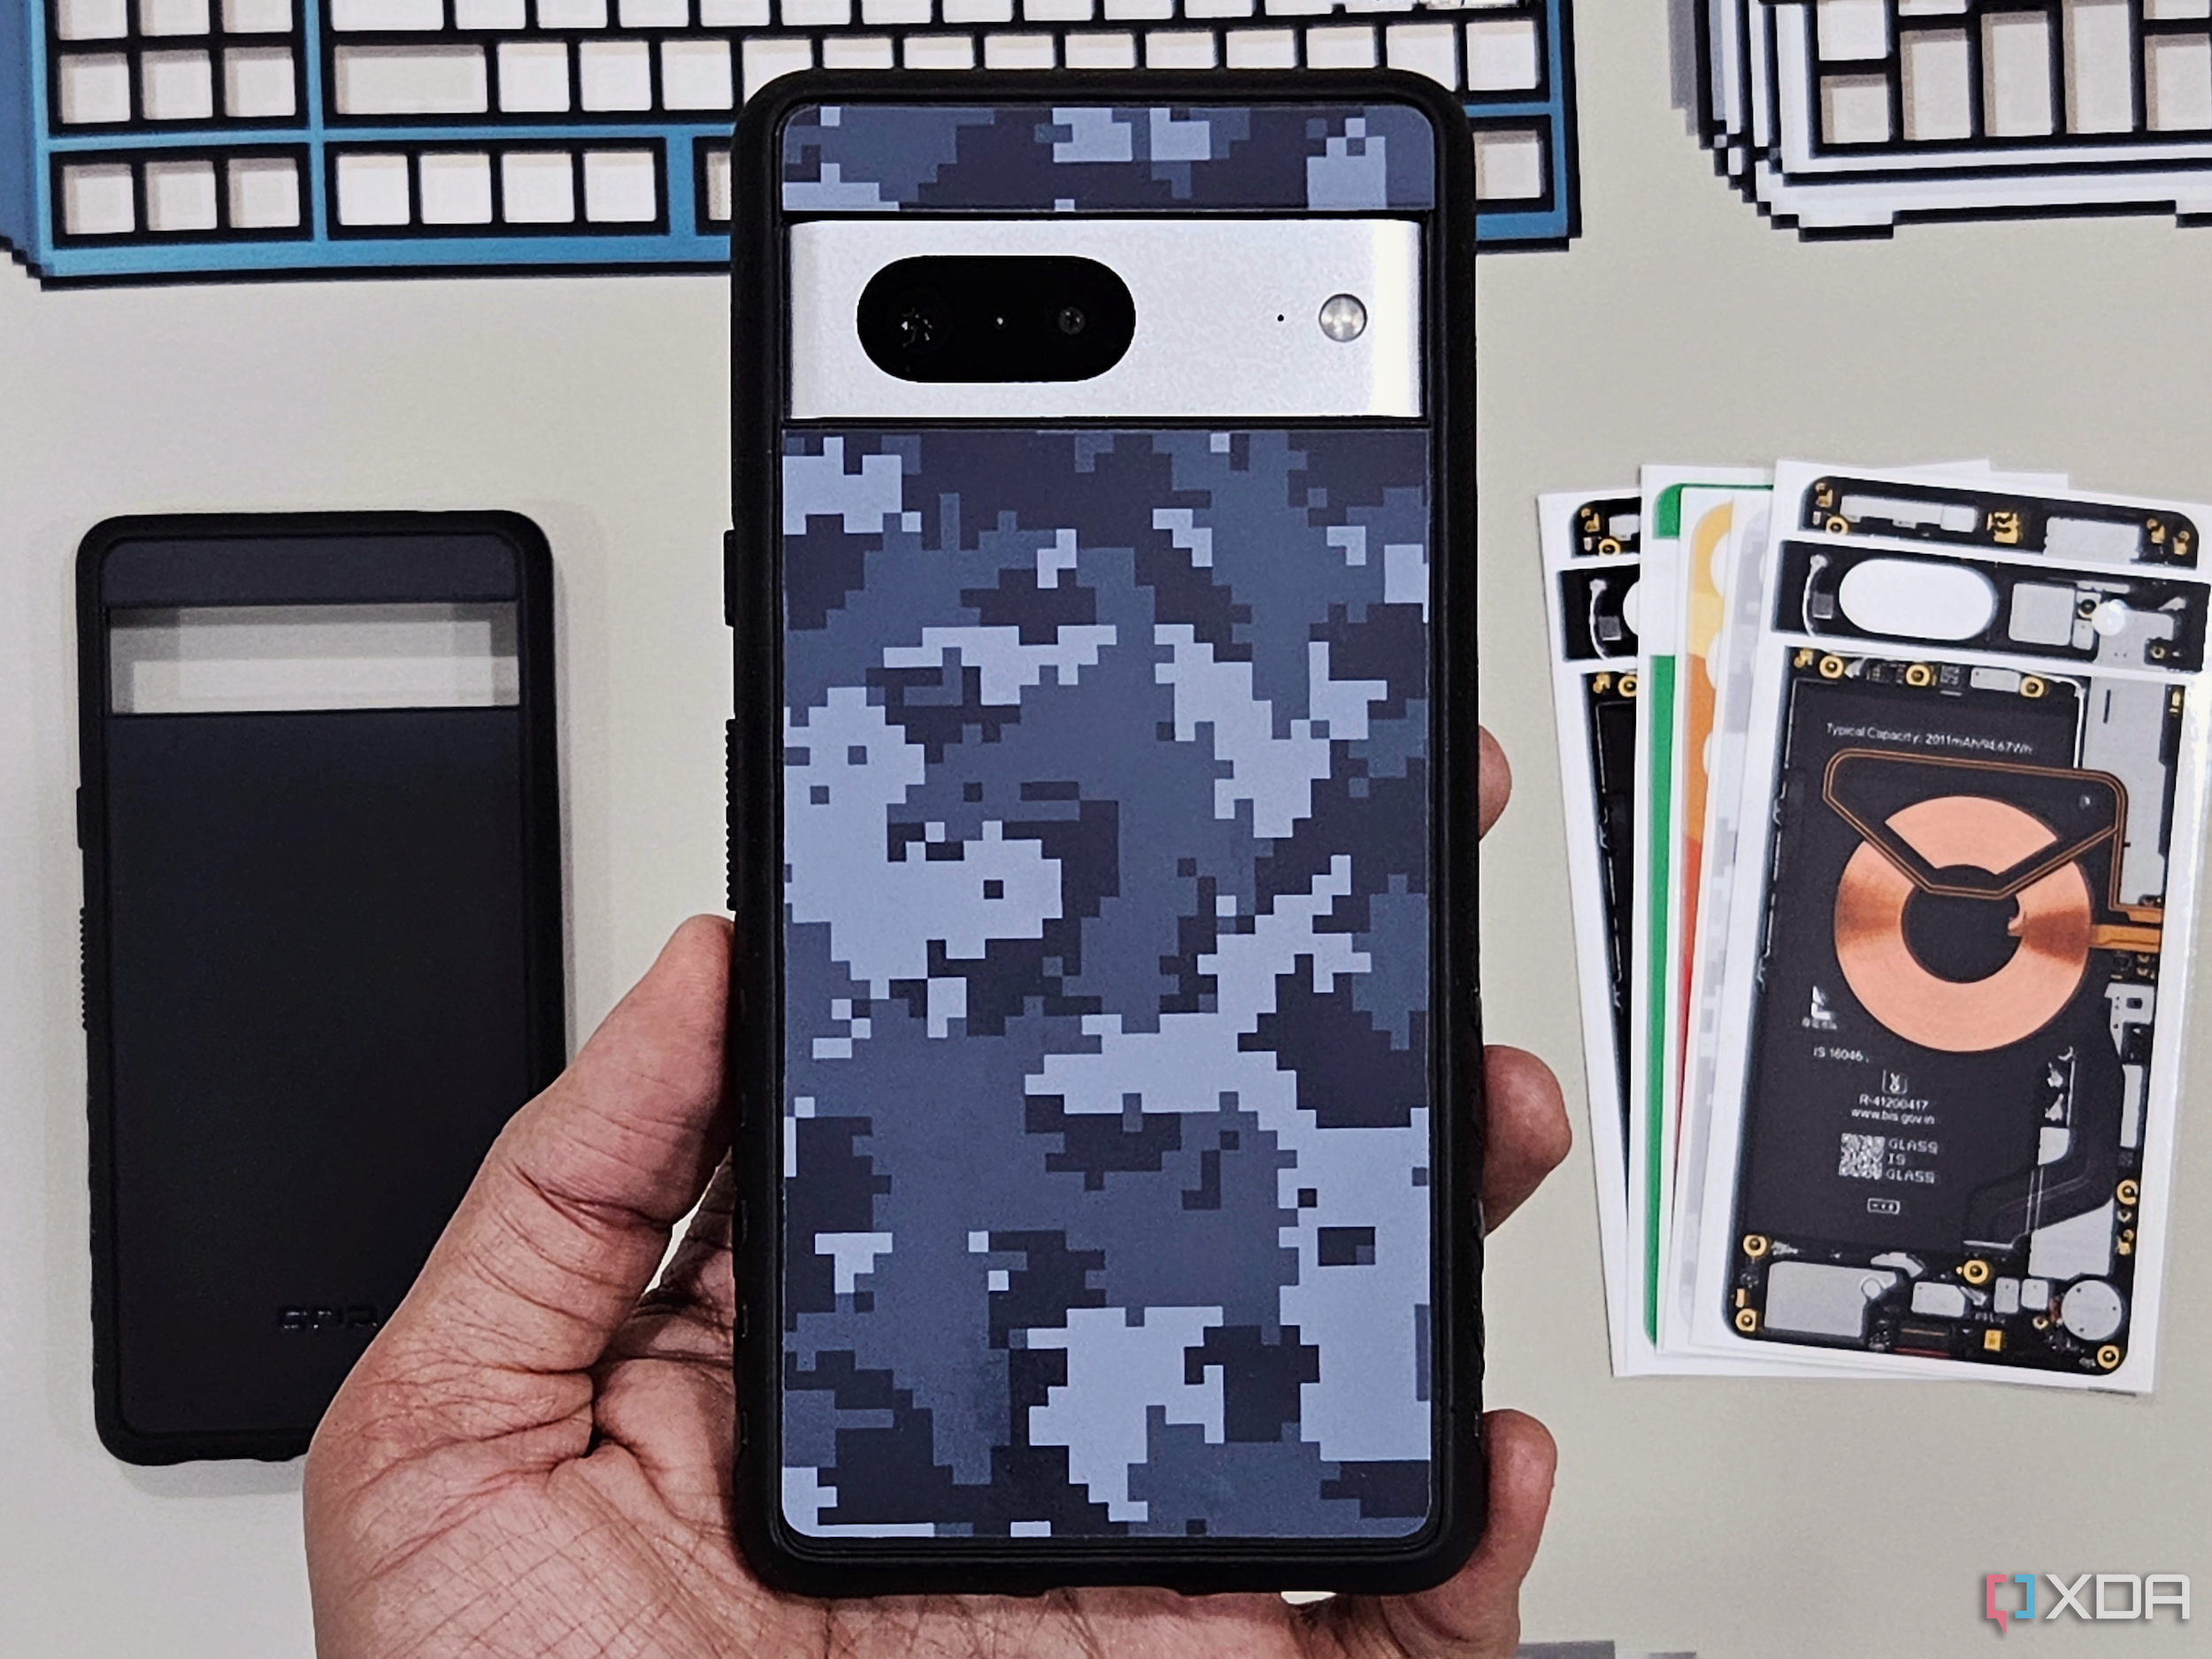 dbrand-grip-case-review:-peak-protection-and-personalization